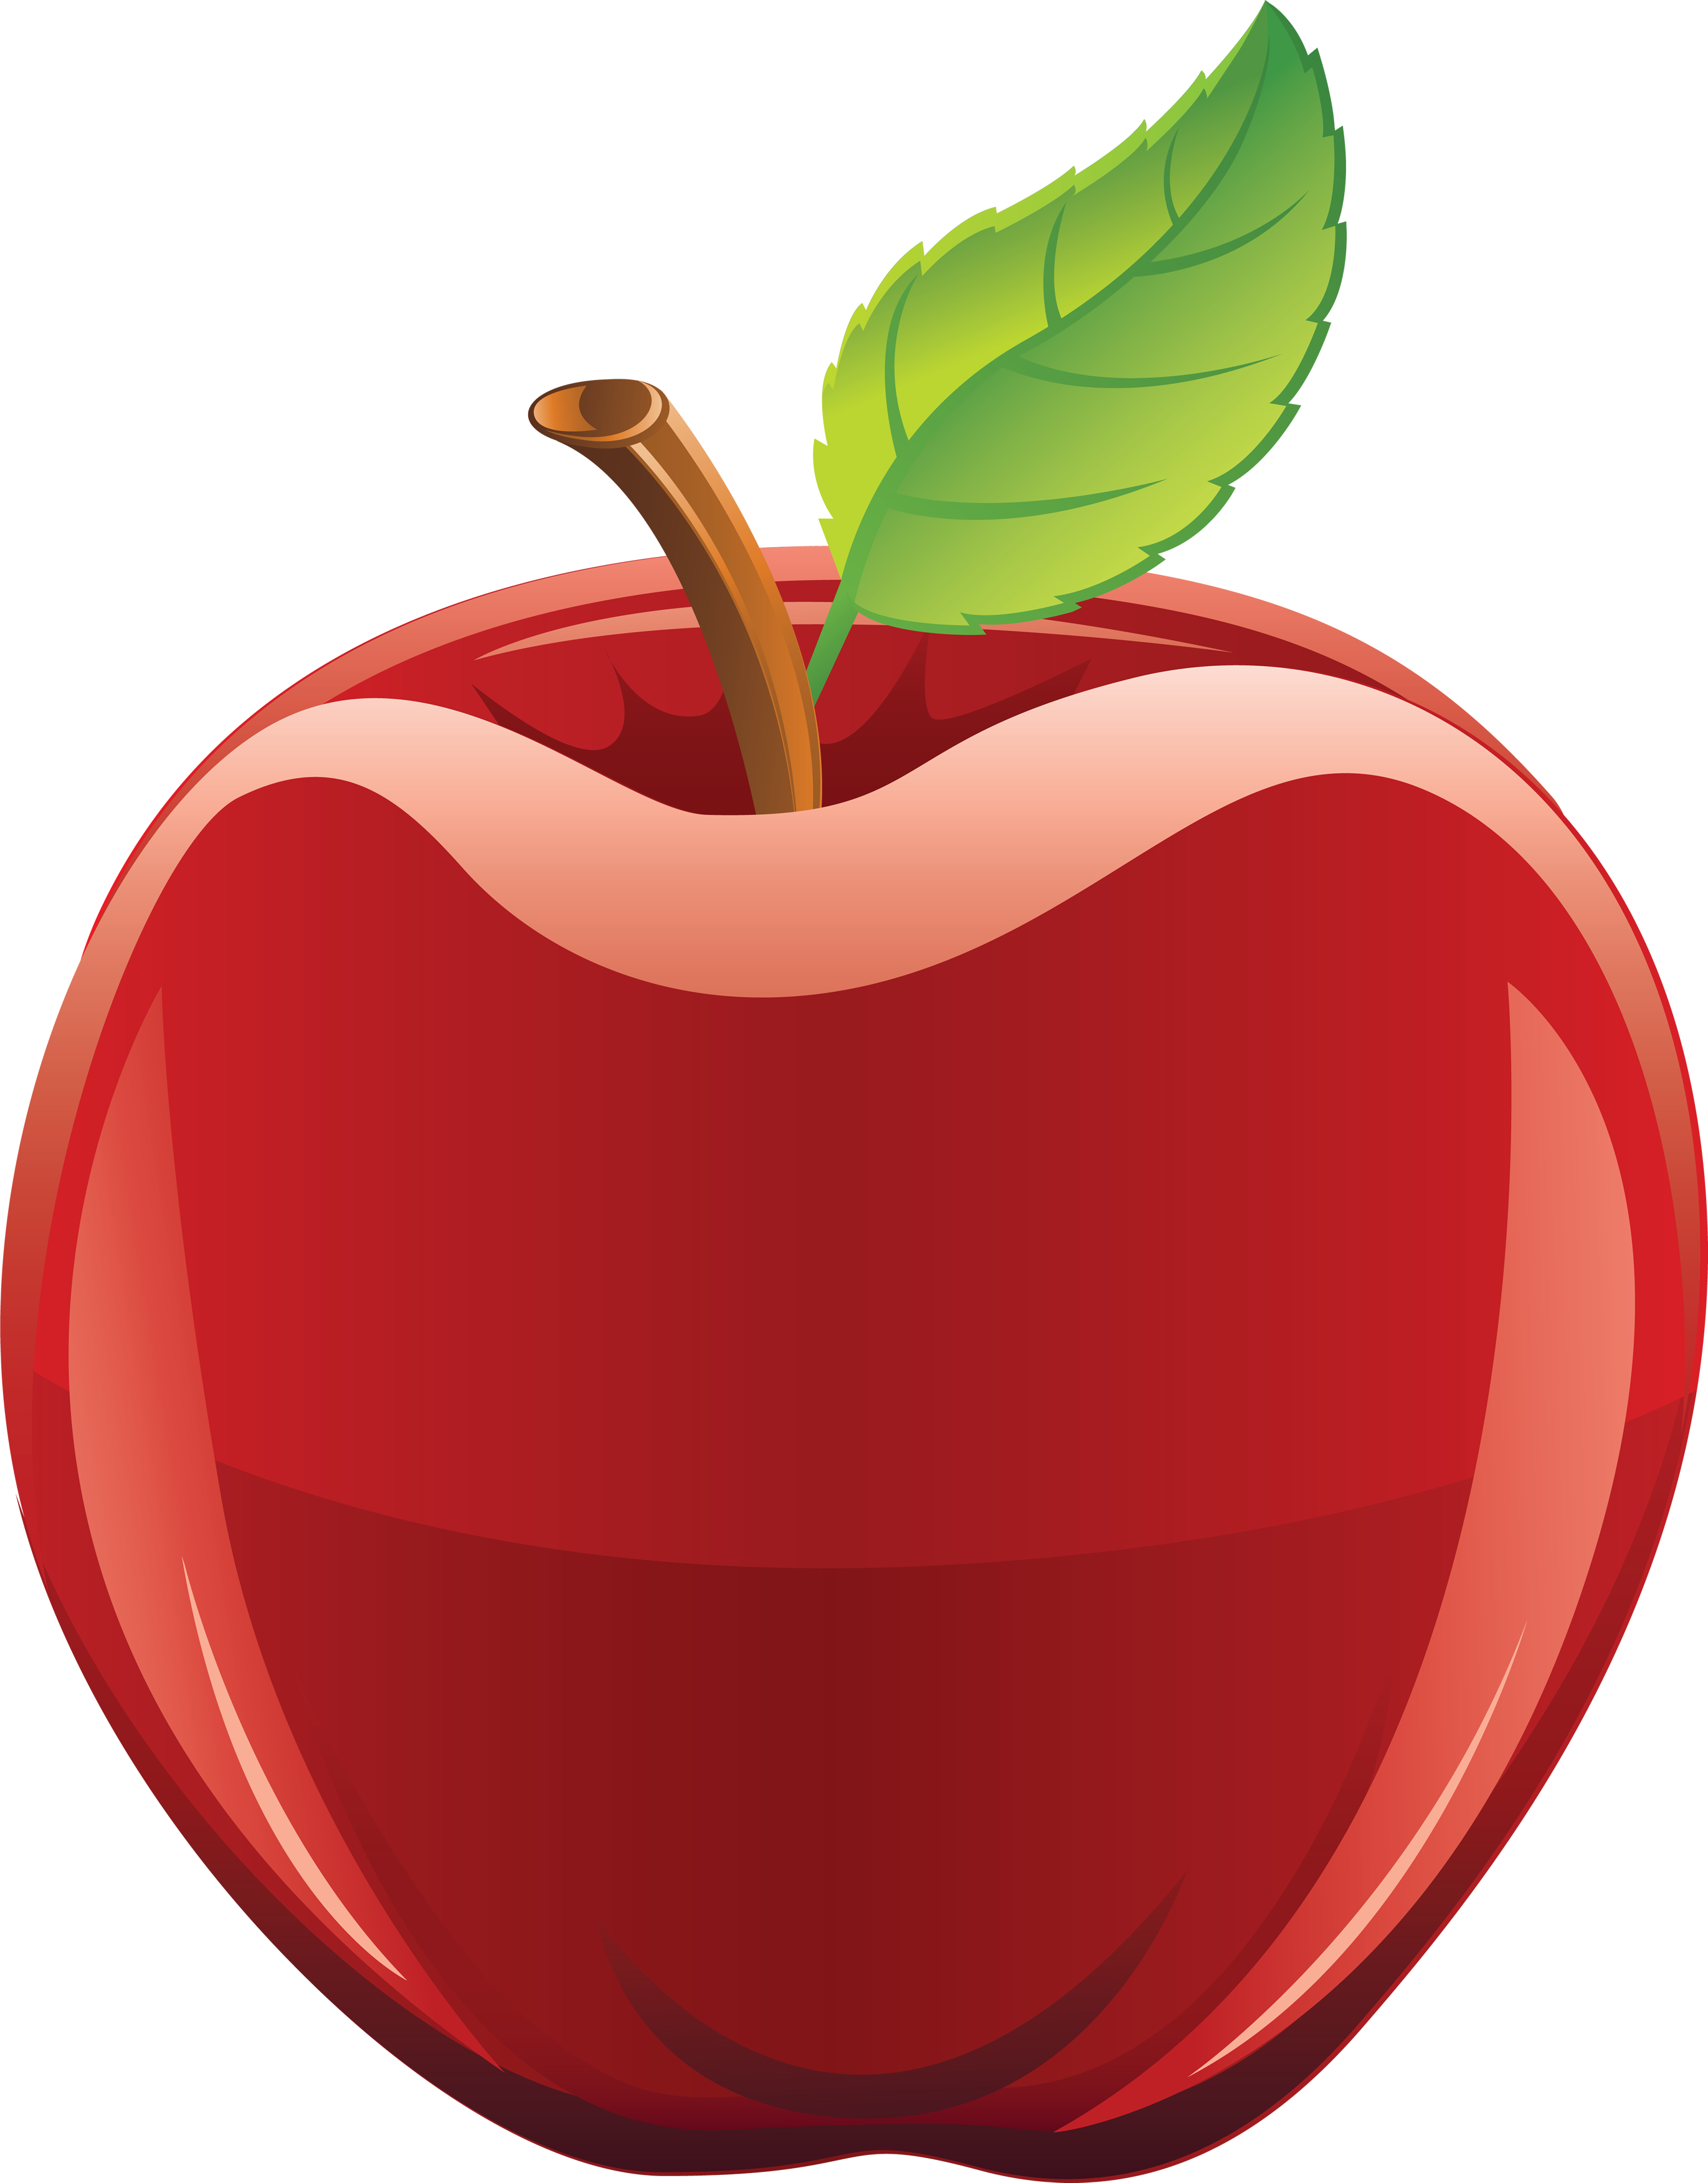 Apple Images Hd Image Clipart